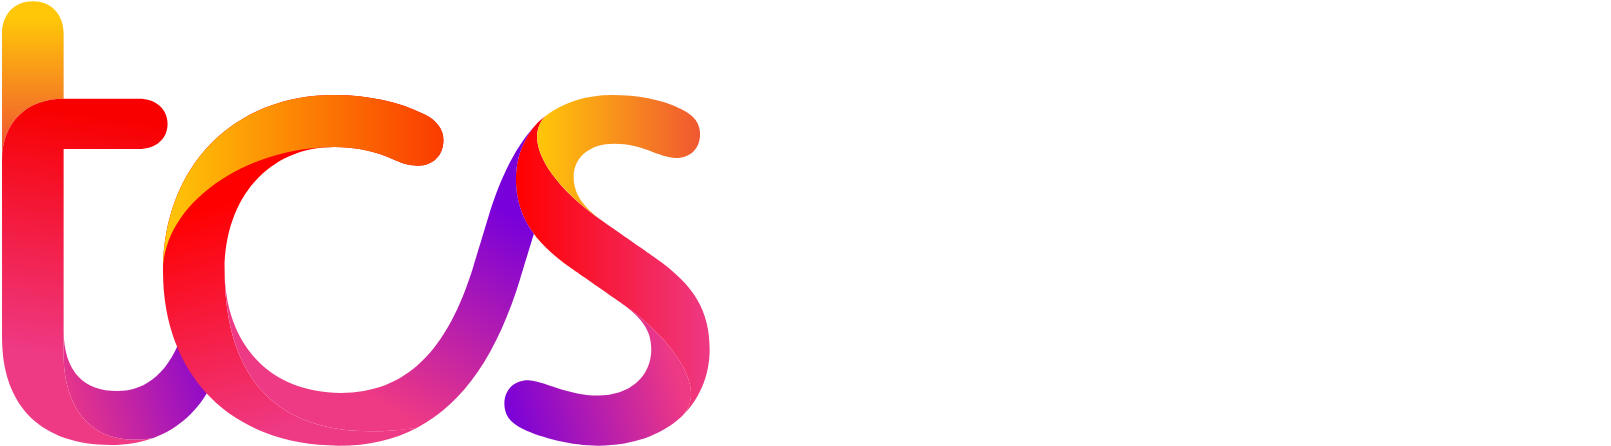 Tata Consultancy Services logo large for dark backgrounds (transparent PNG)